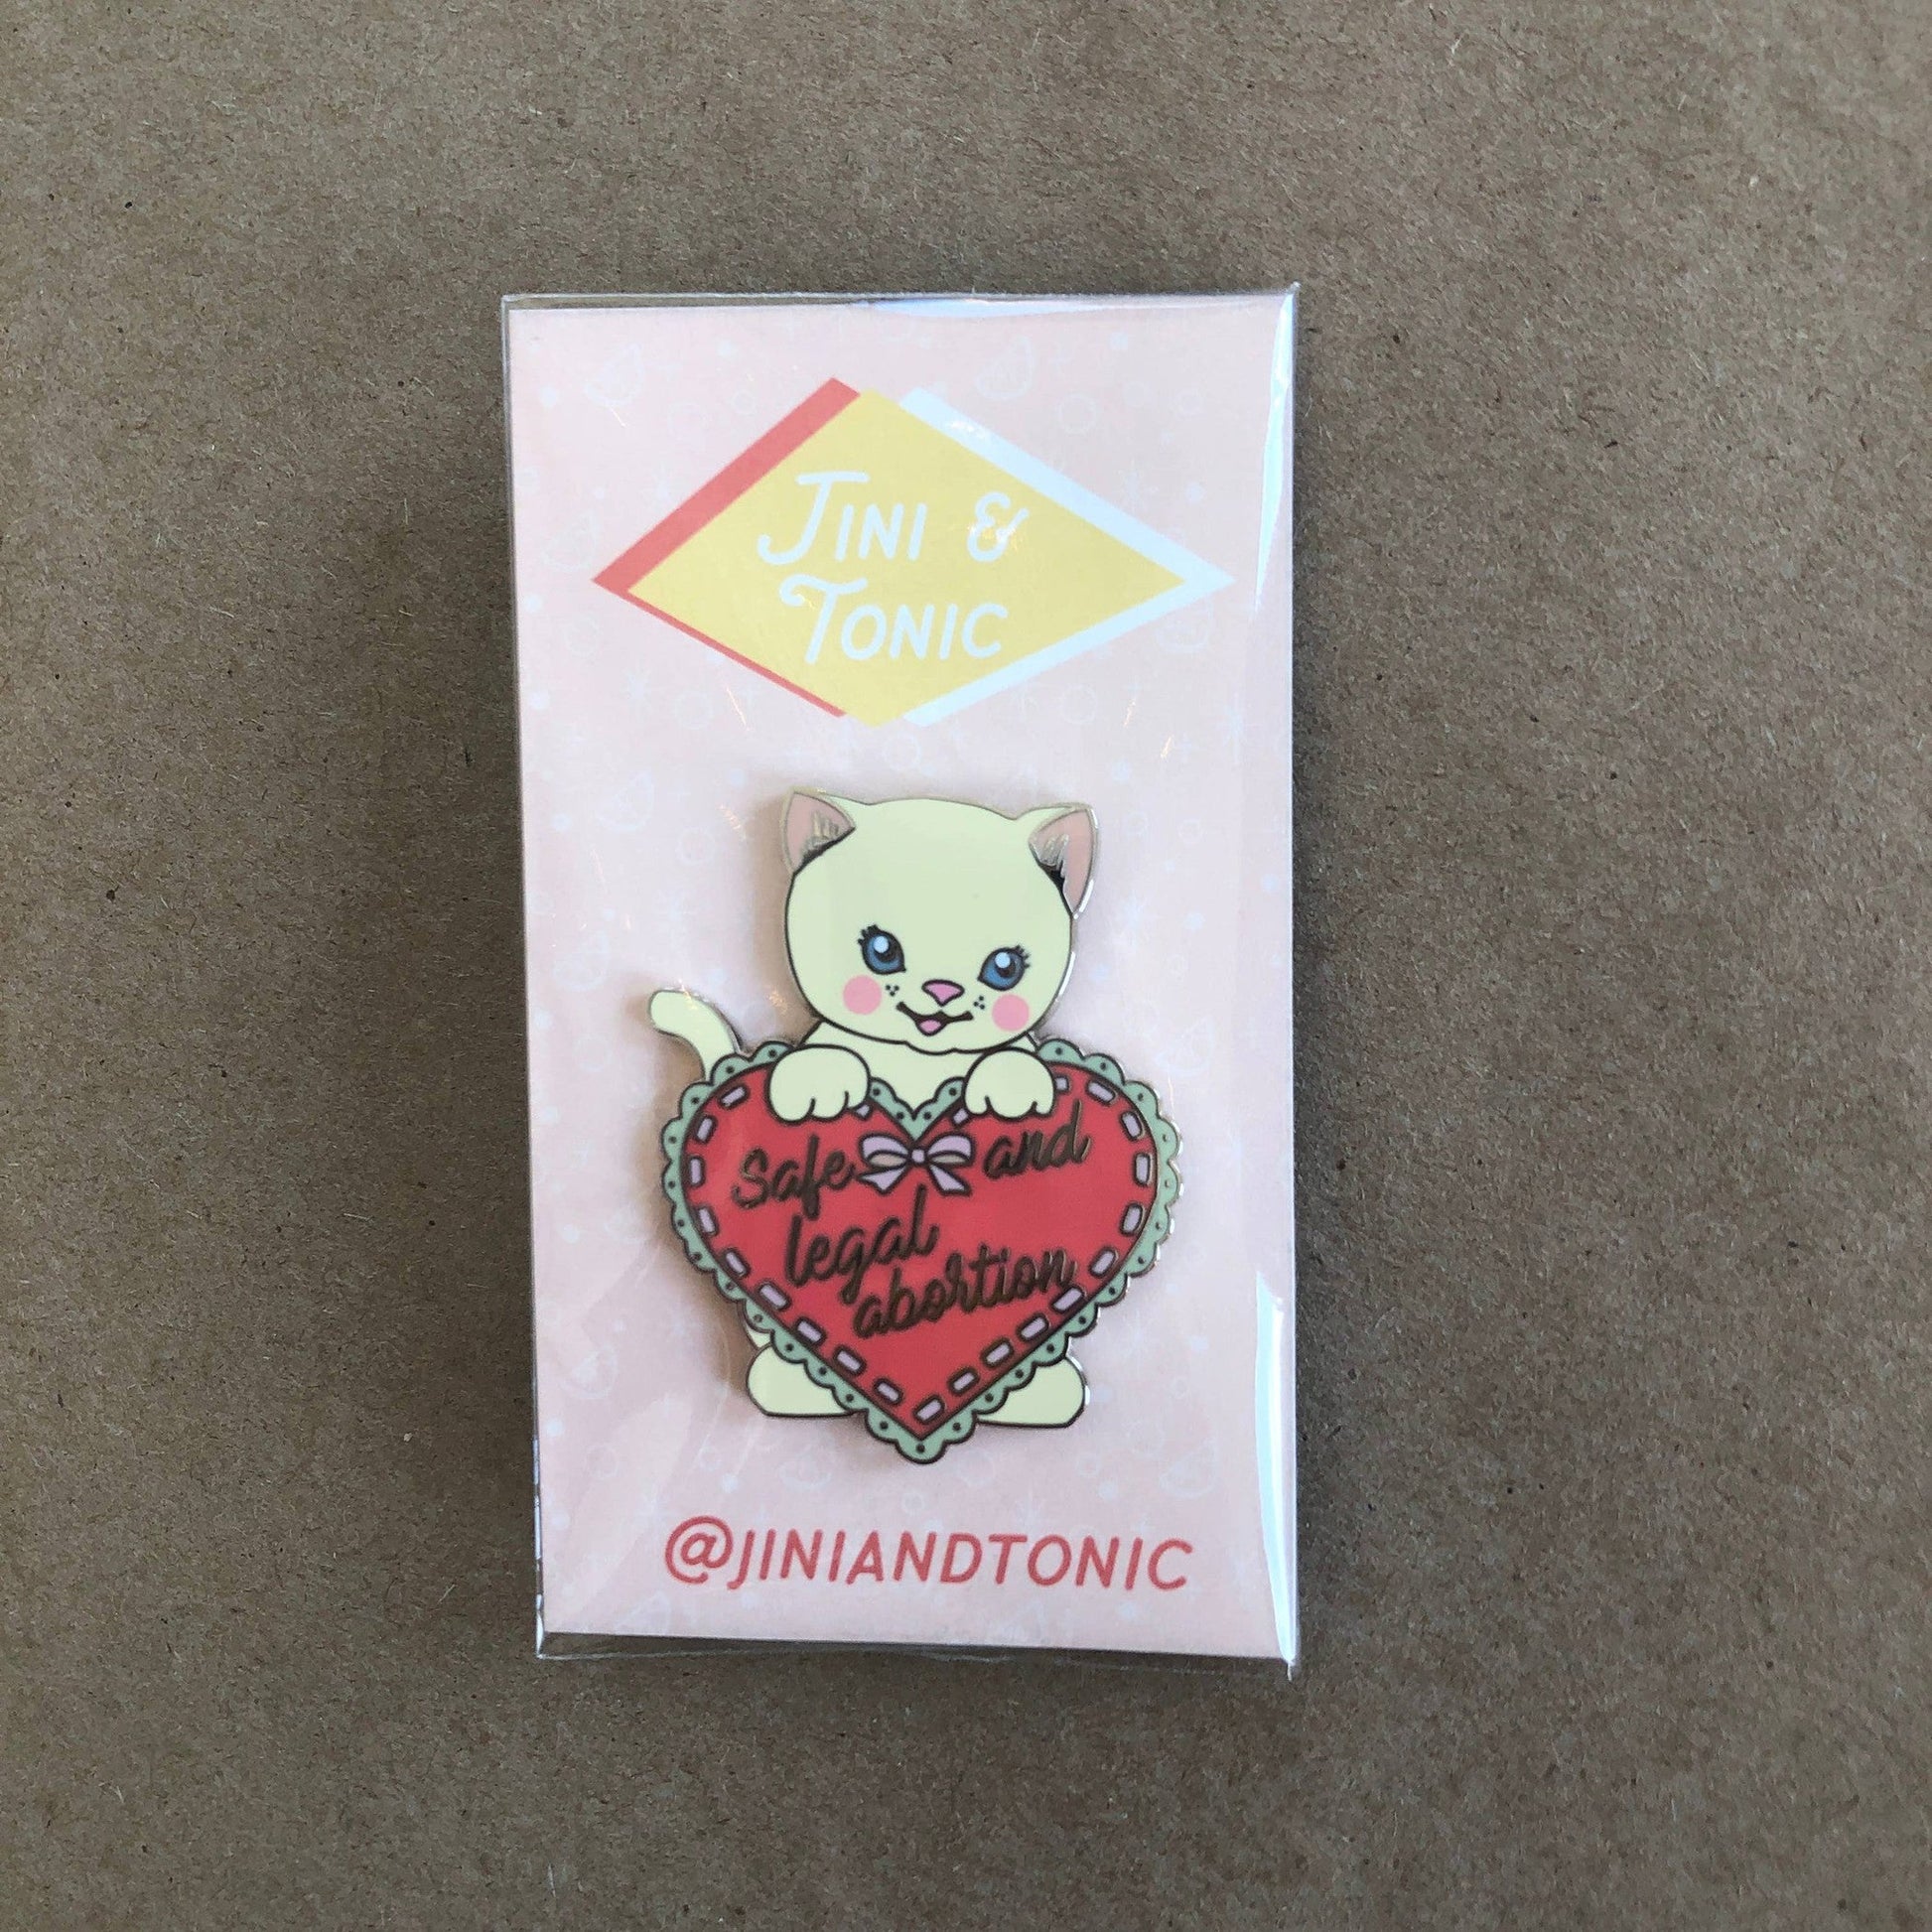 Safe and Legal Abortion Enamel Kitten Pin | Pro-Choice Reproductive Rights